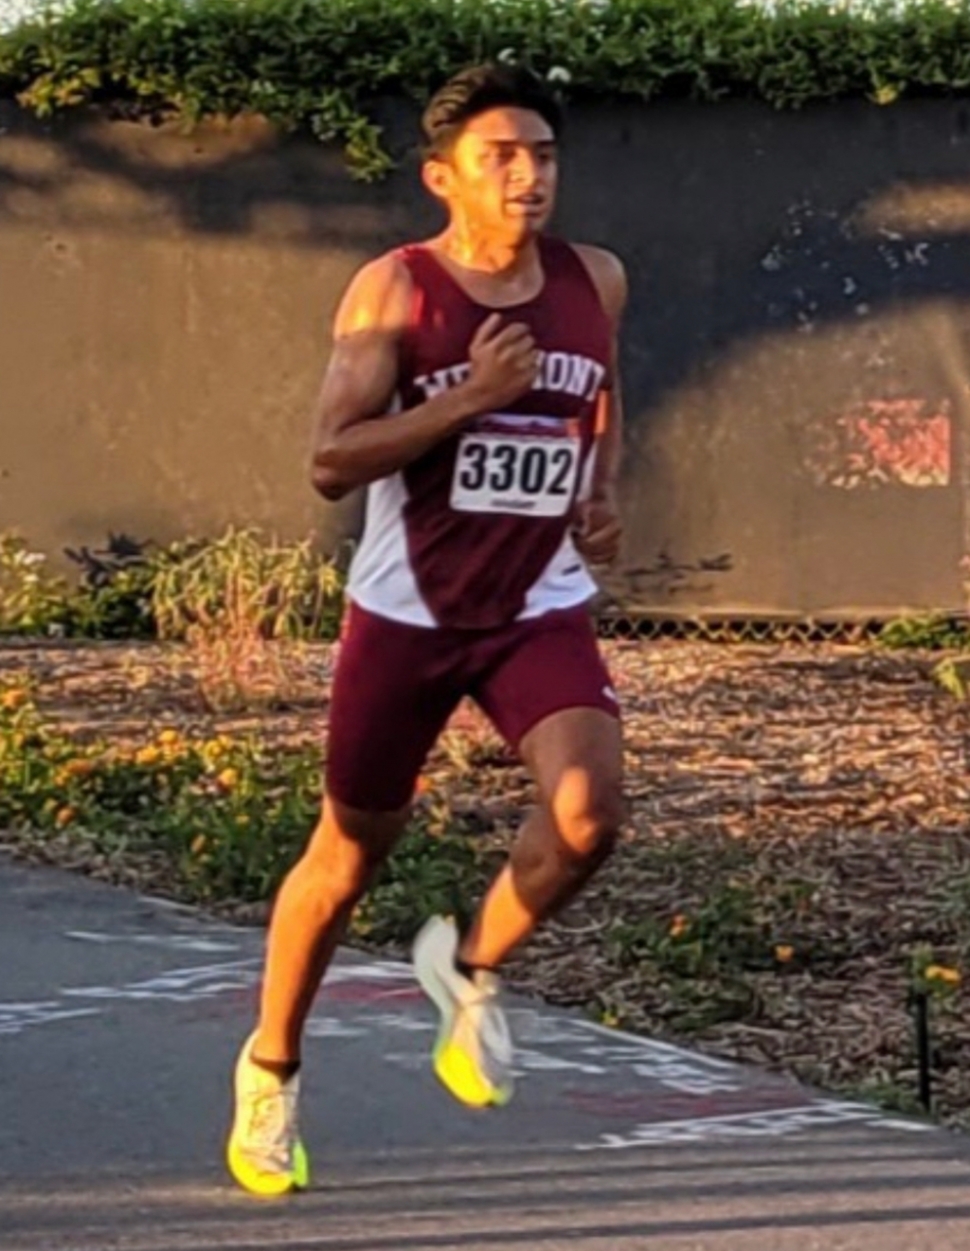 Former Flash Rey Laureano as he competes at Apalachee Regional Park in Tallahassee Florida for Westmont Cross Country. 